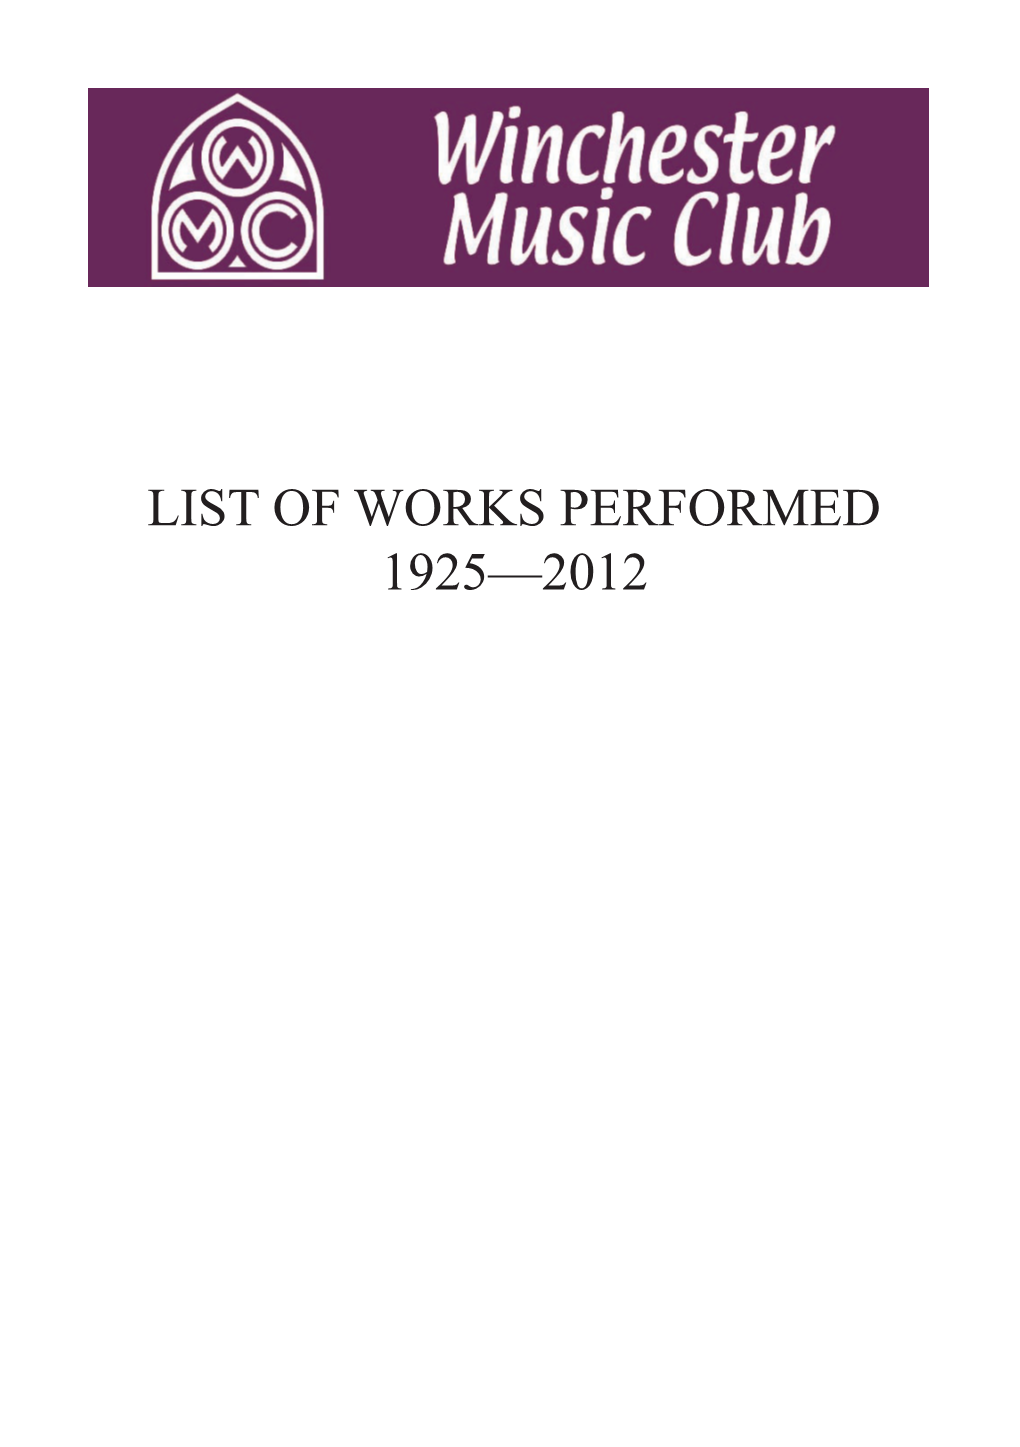 LIST of WORKS PERFORMED 1925—2012 FOREWORD to the 2011 Edition